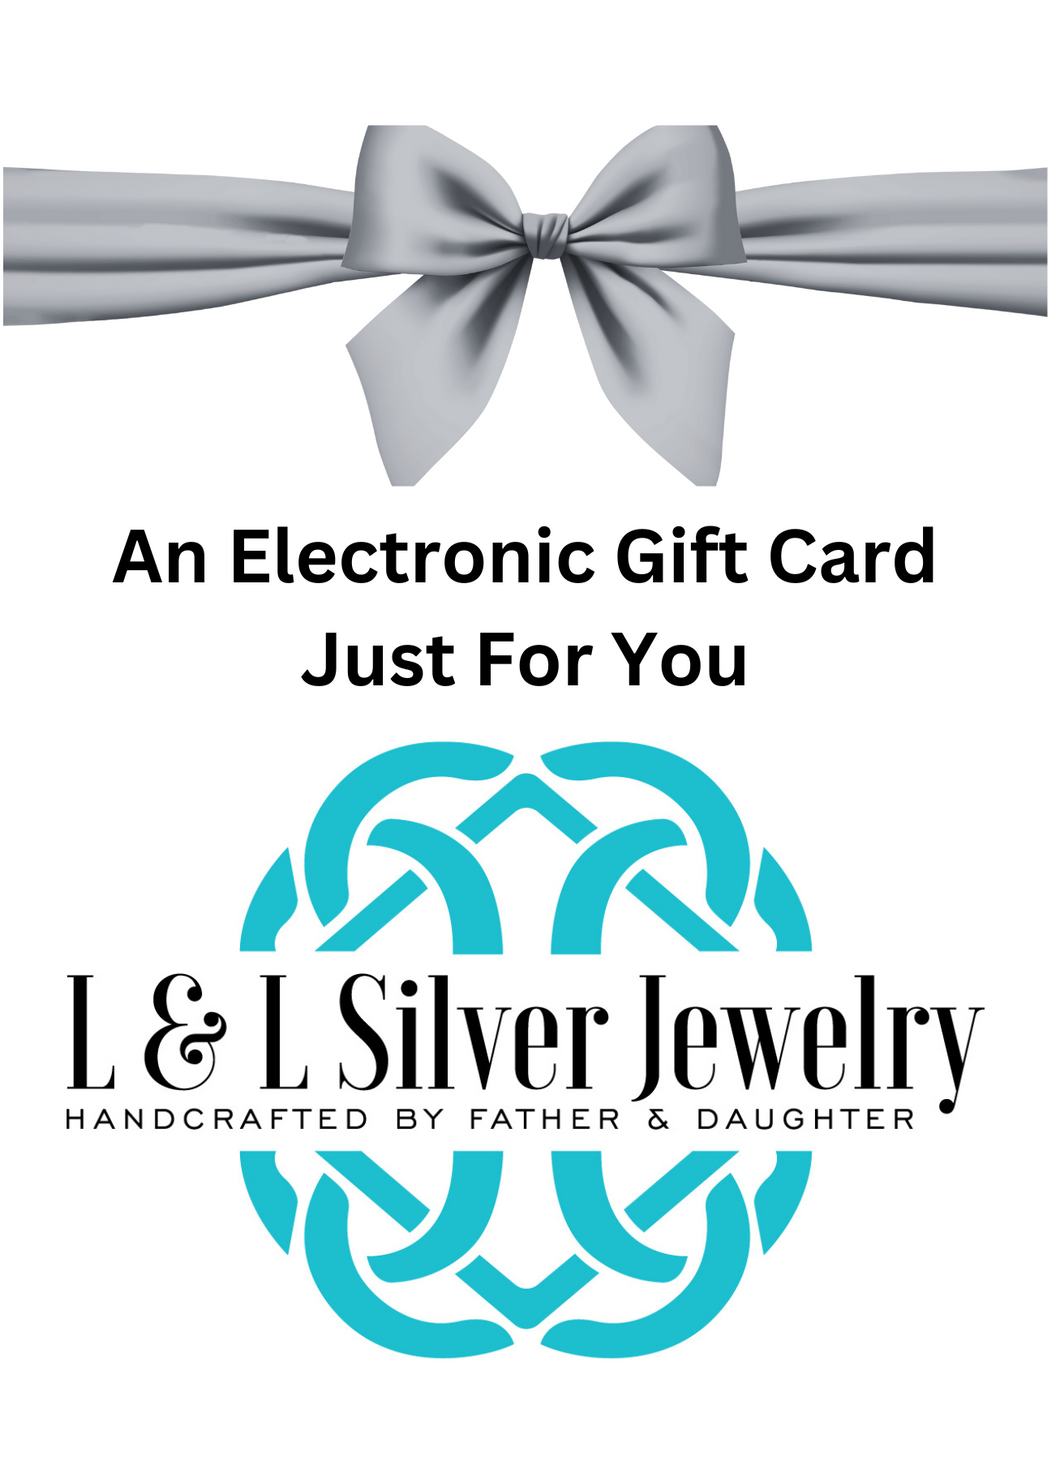 $75 Electronic Gift Card